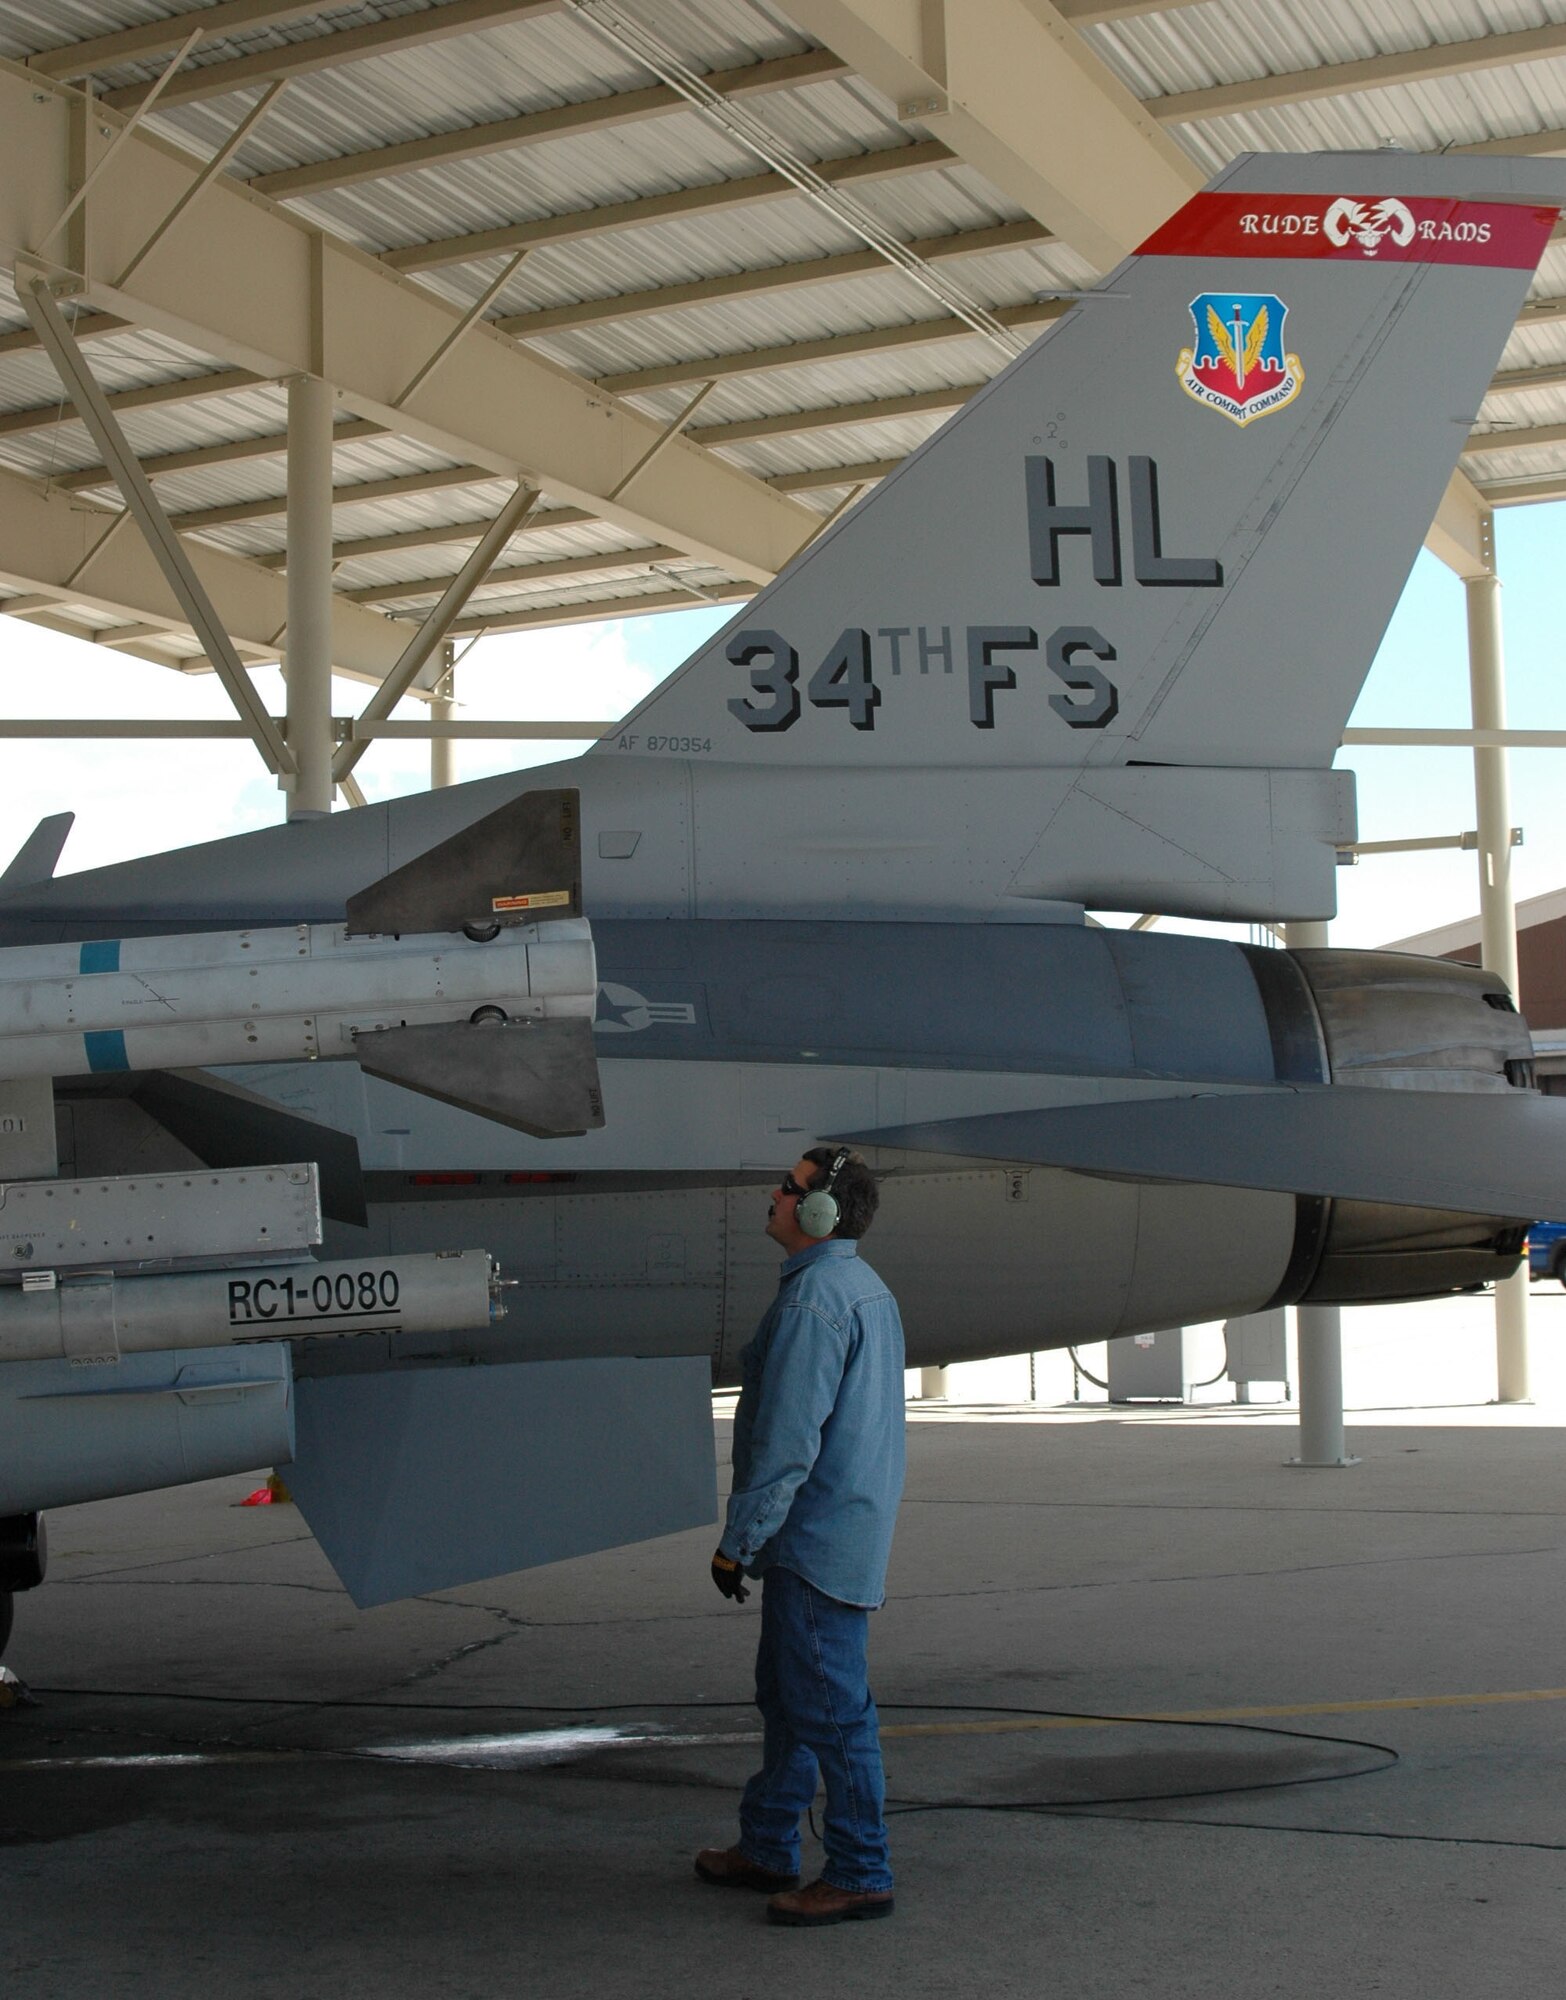 James Lafeen, a 419th Fighter Wing Air Reserve Technician and crew chief, inspects an active duty F-16 prior to take-off May 23.  Mr. Lafeen joined the Reserves in 1990 after serving three years on active duty.  The Reserve and active duty fighter wings at Hill are associating under Total Force Integration. (U.S. Air Force photo by 2nd Lt. Beth Woodward)